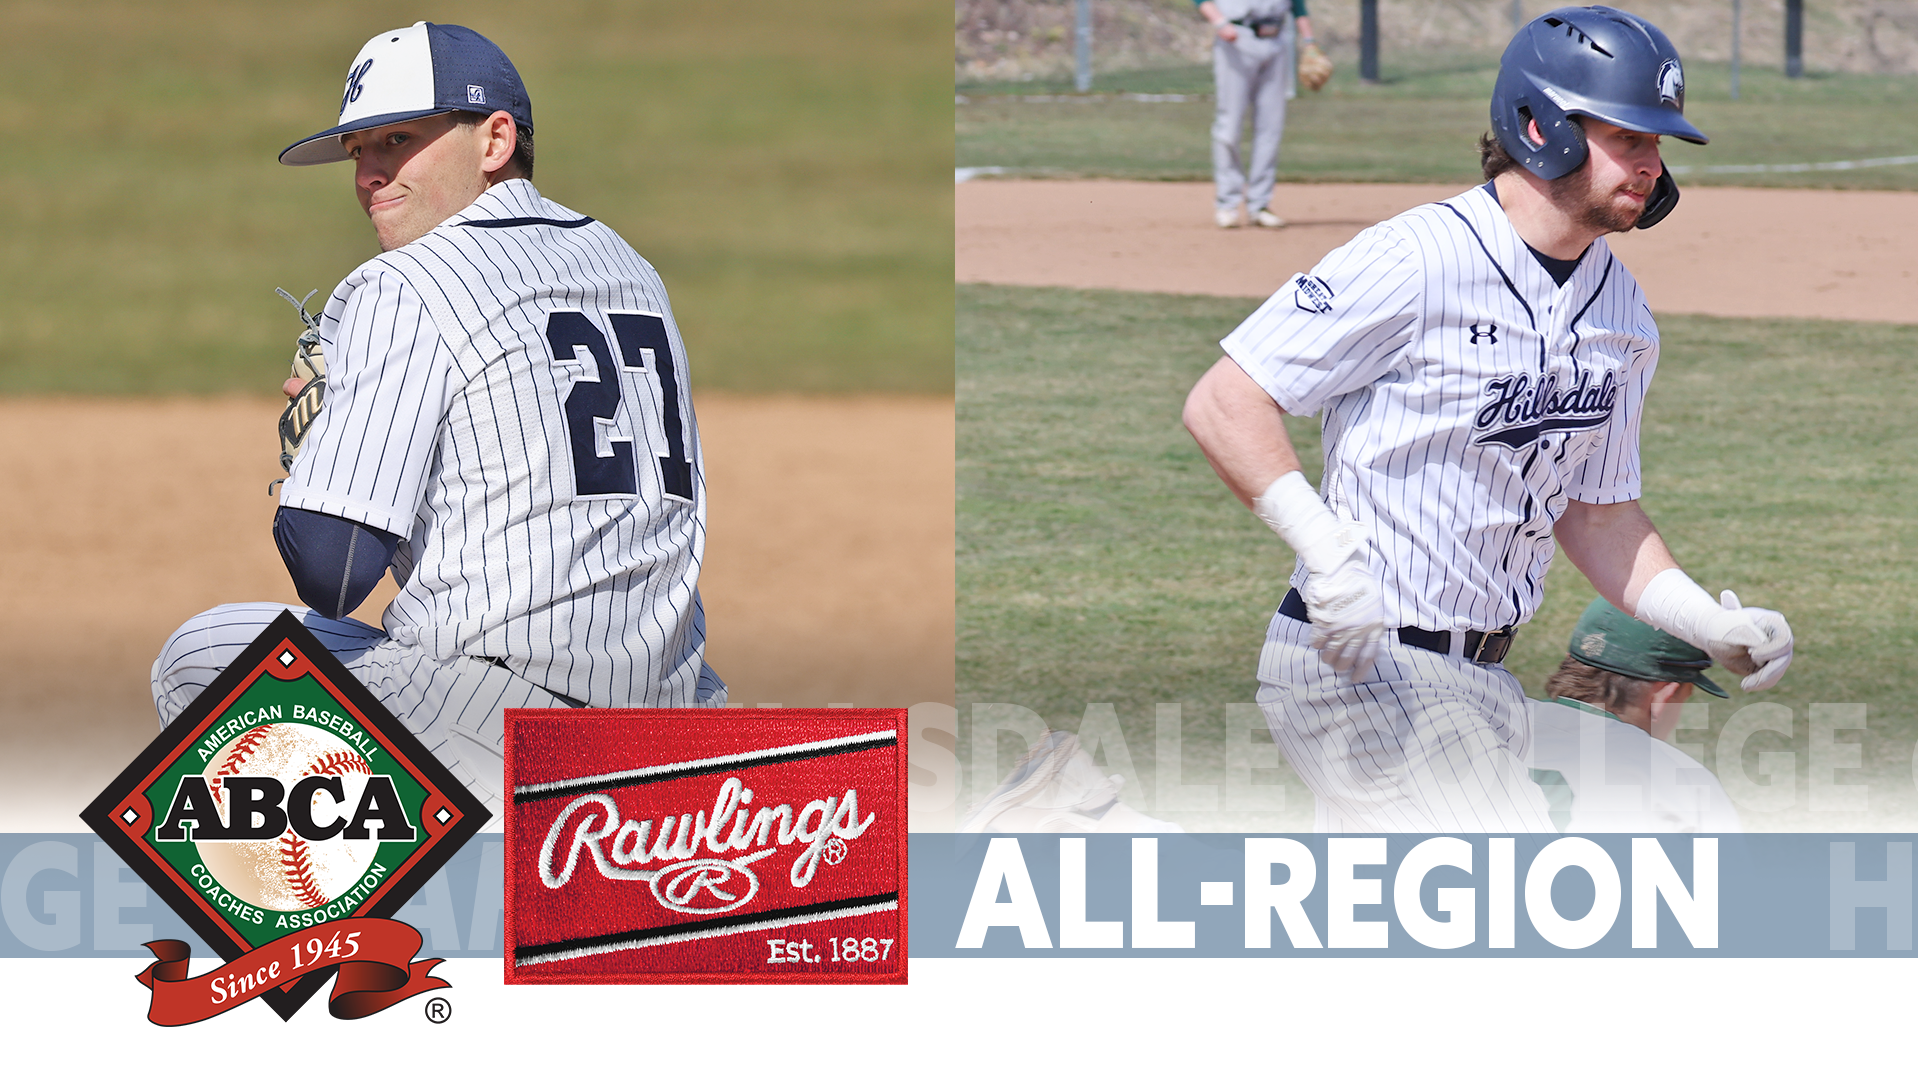 Chargers' Barnhart, Shannon earn second-team ABCA All-Region honors, complete sweep of regional awards